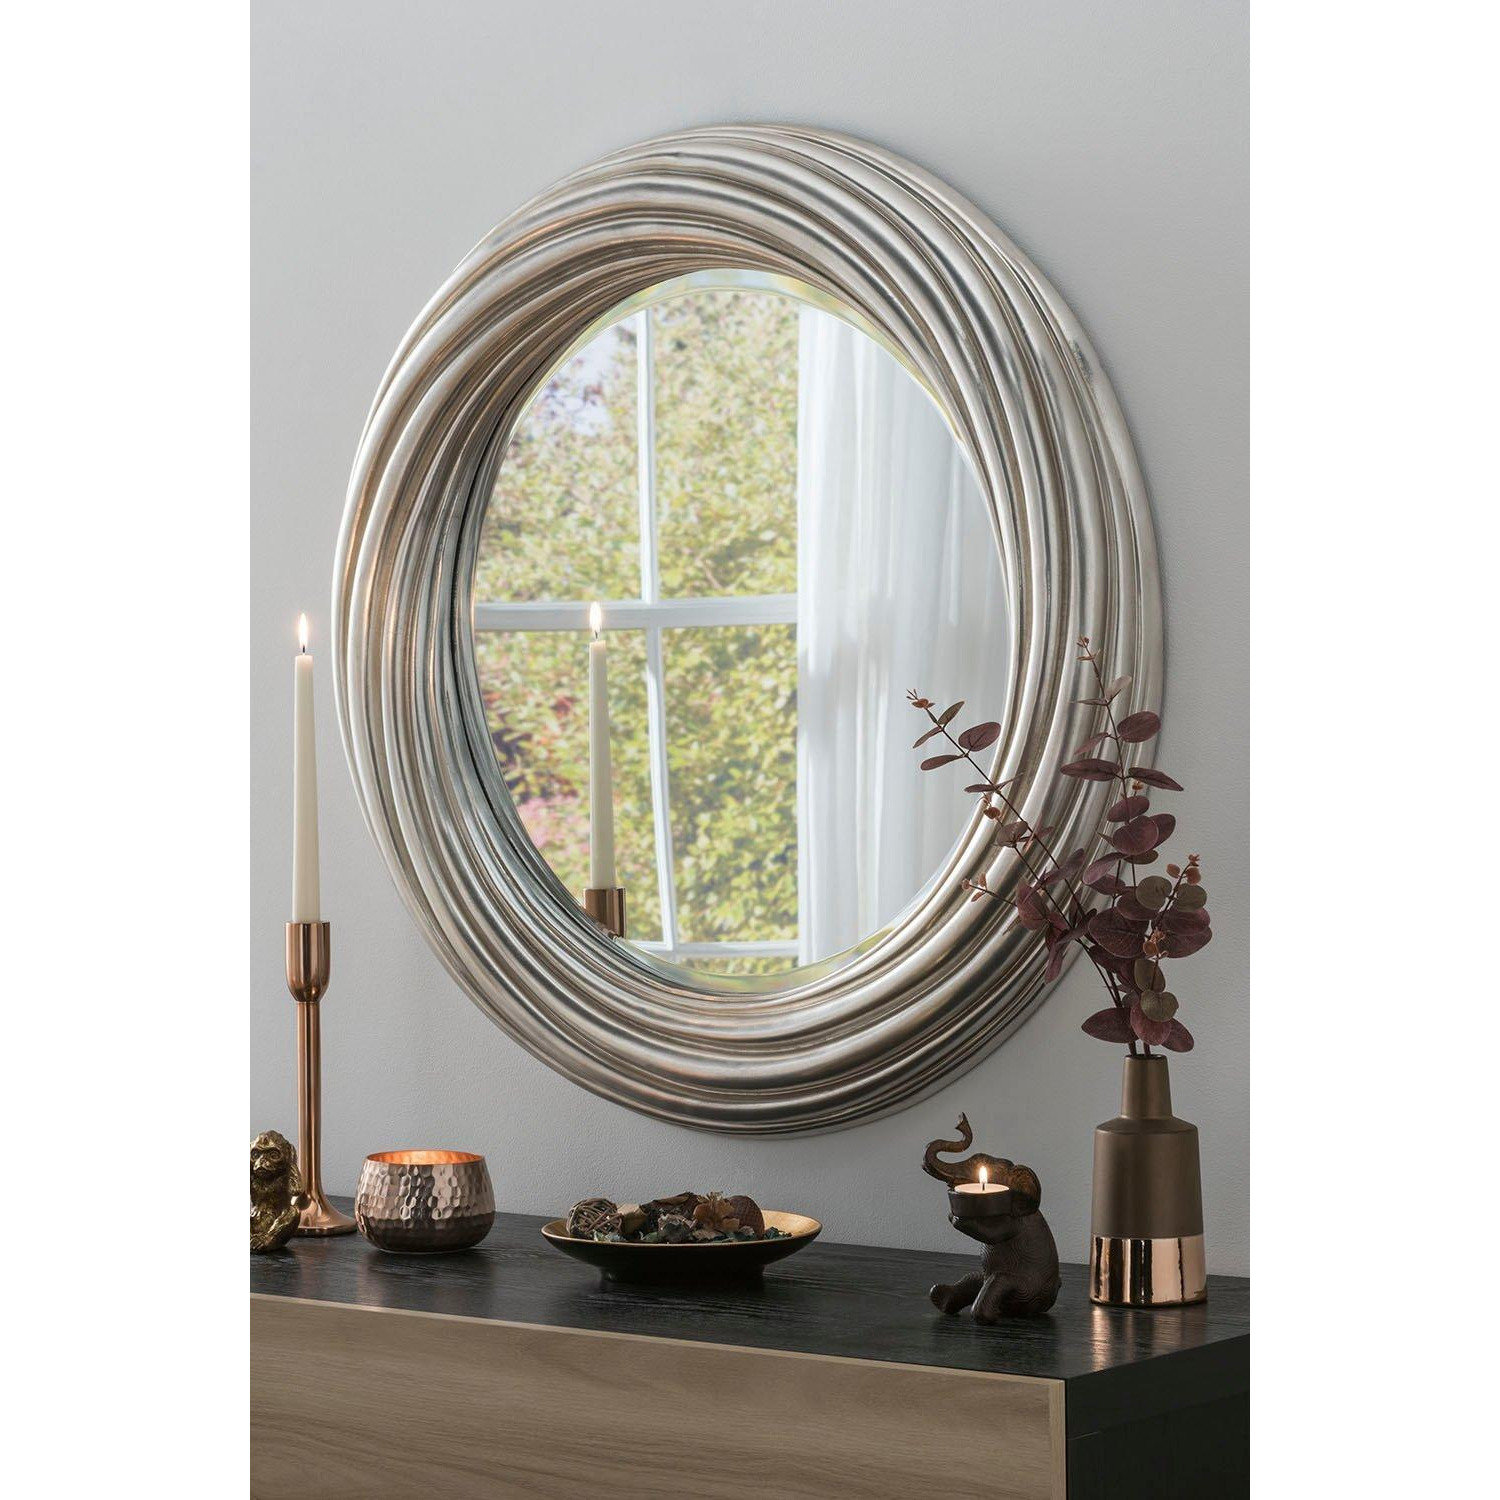 Large round Silvery champagne mirror 84cm - image 1